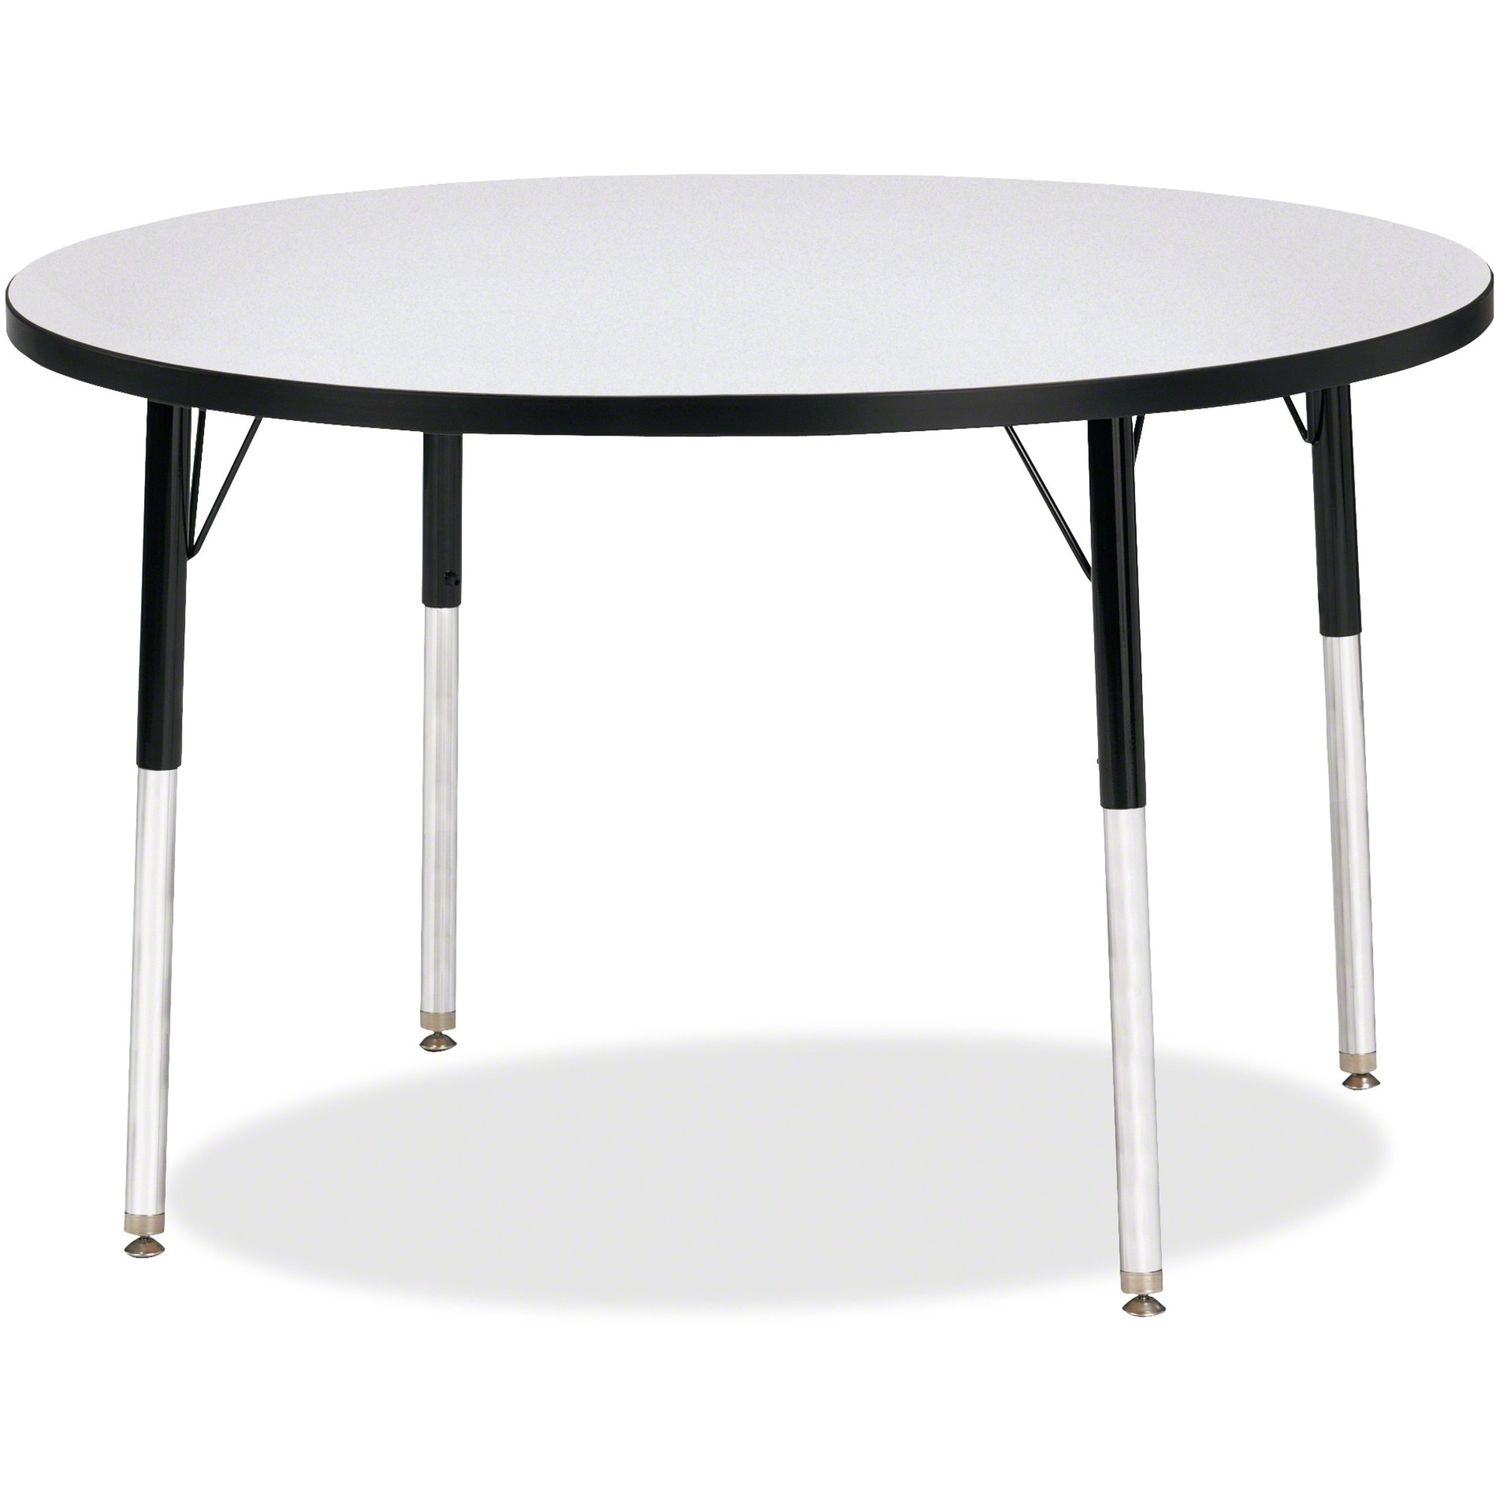 Berries Adult Height Color Edge Round Table Black Round, Laminated Top, Four Leg Base, 4 Legs, 1.13" Table Top Thickness x 42" Table Top Diameter, 31" Height, Assembly Required, Powder Coated